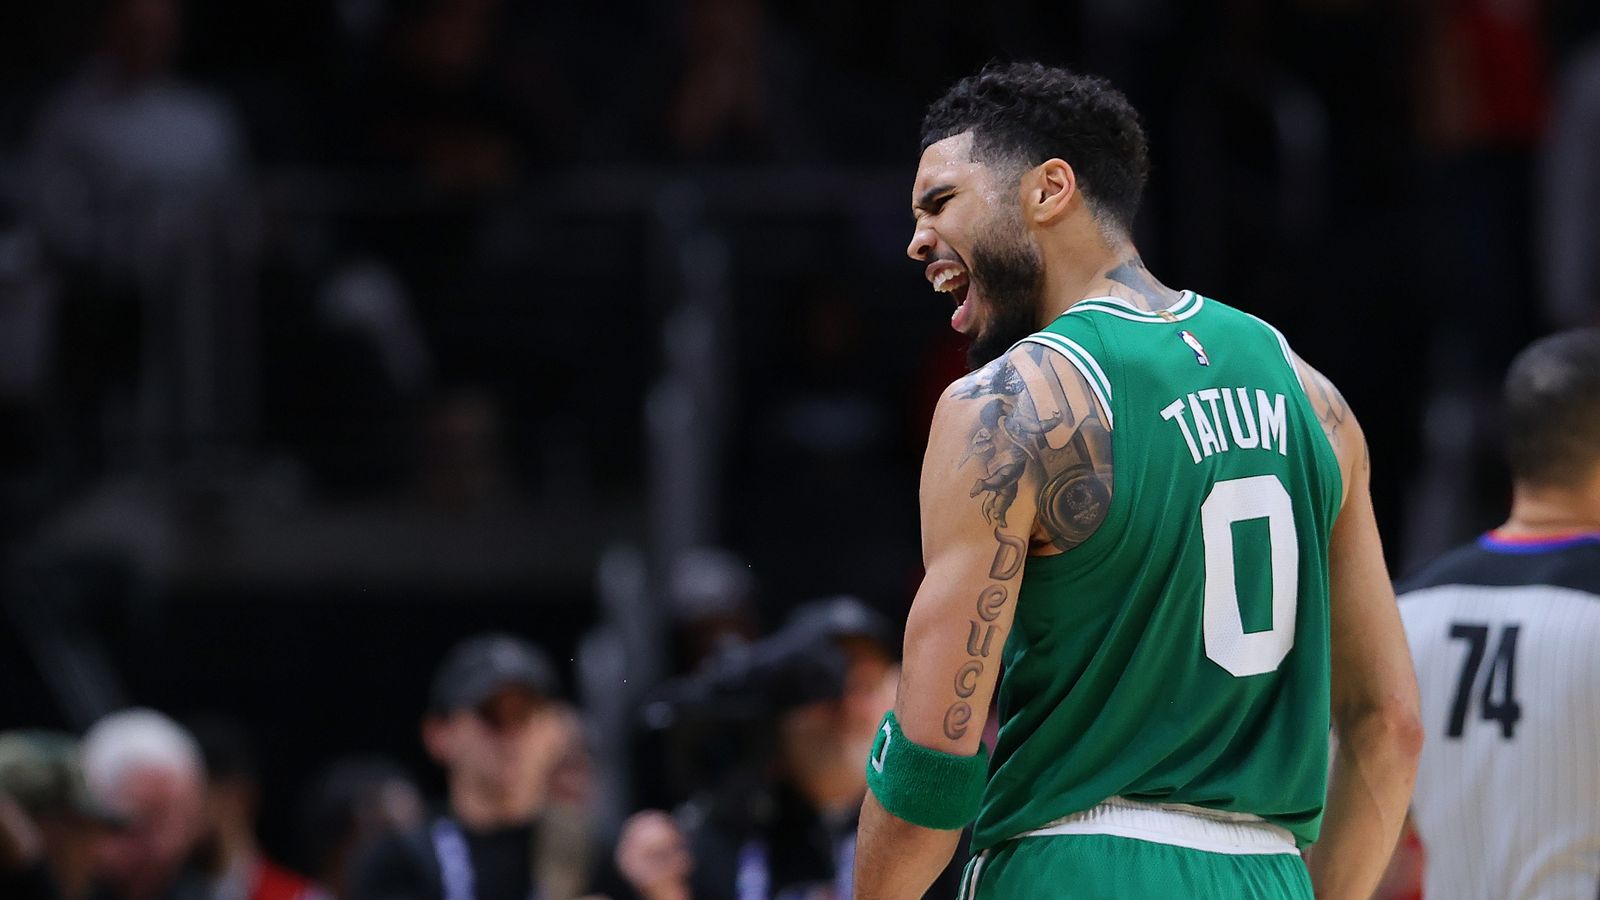 First Joe Mazzulla lost his team. Now the Celtics are on the verge of  losing the series in embarrassing fashion. - The Boston Globe